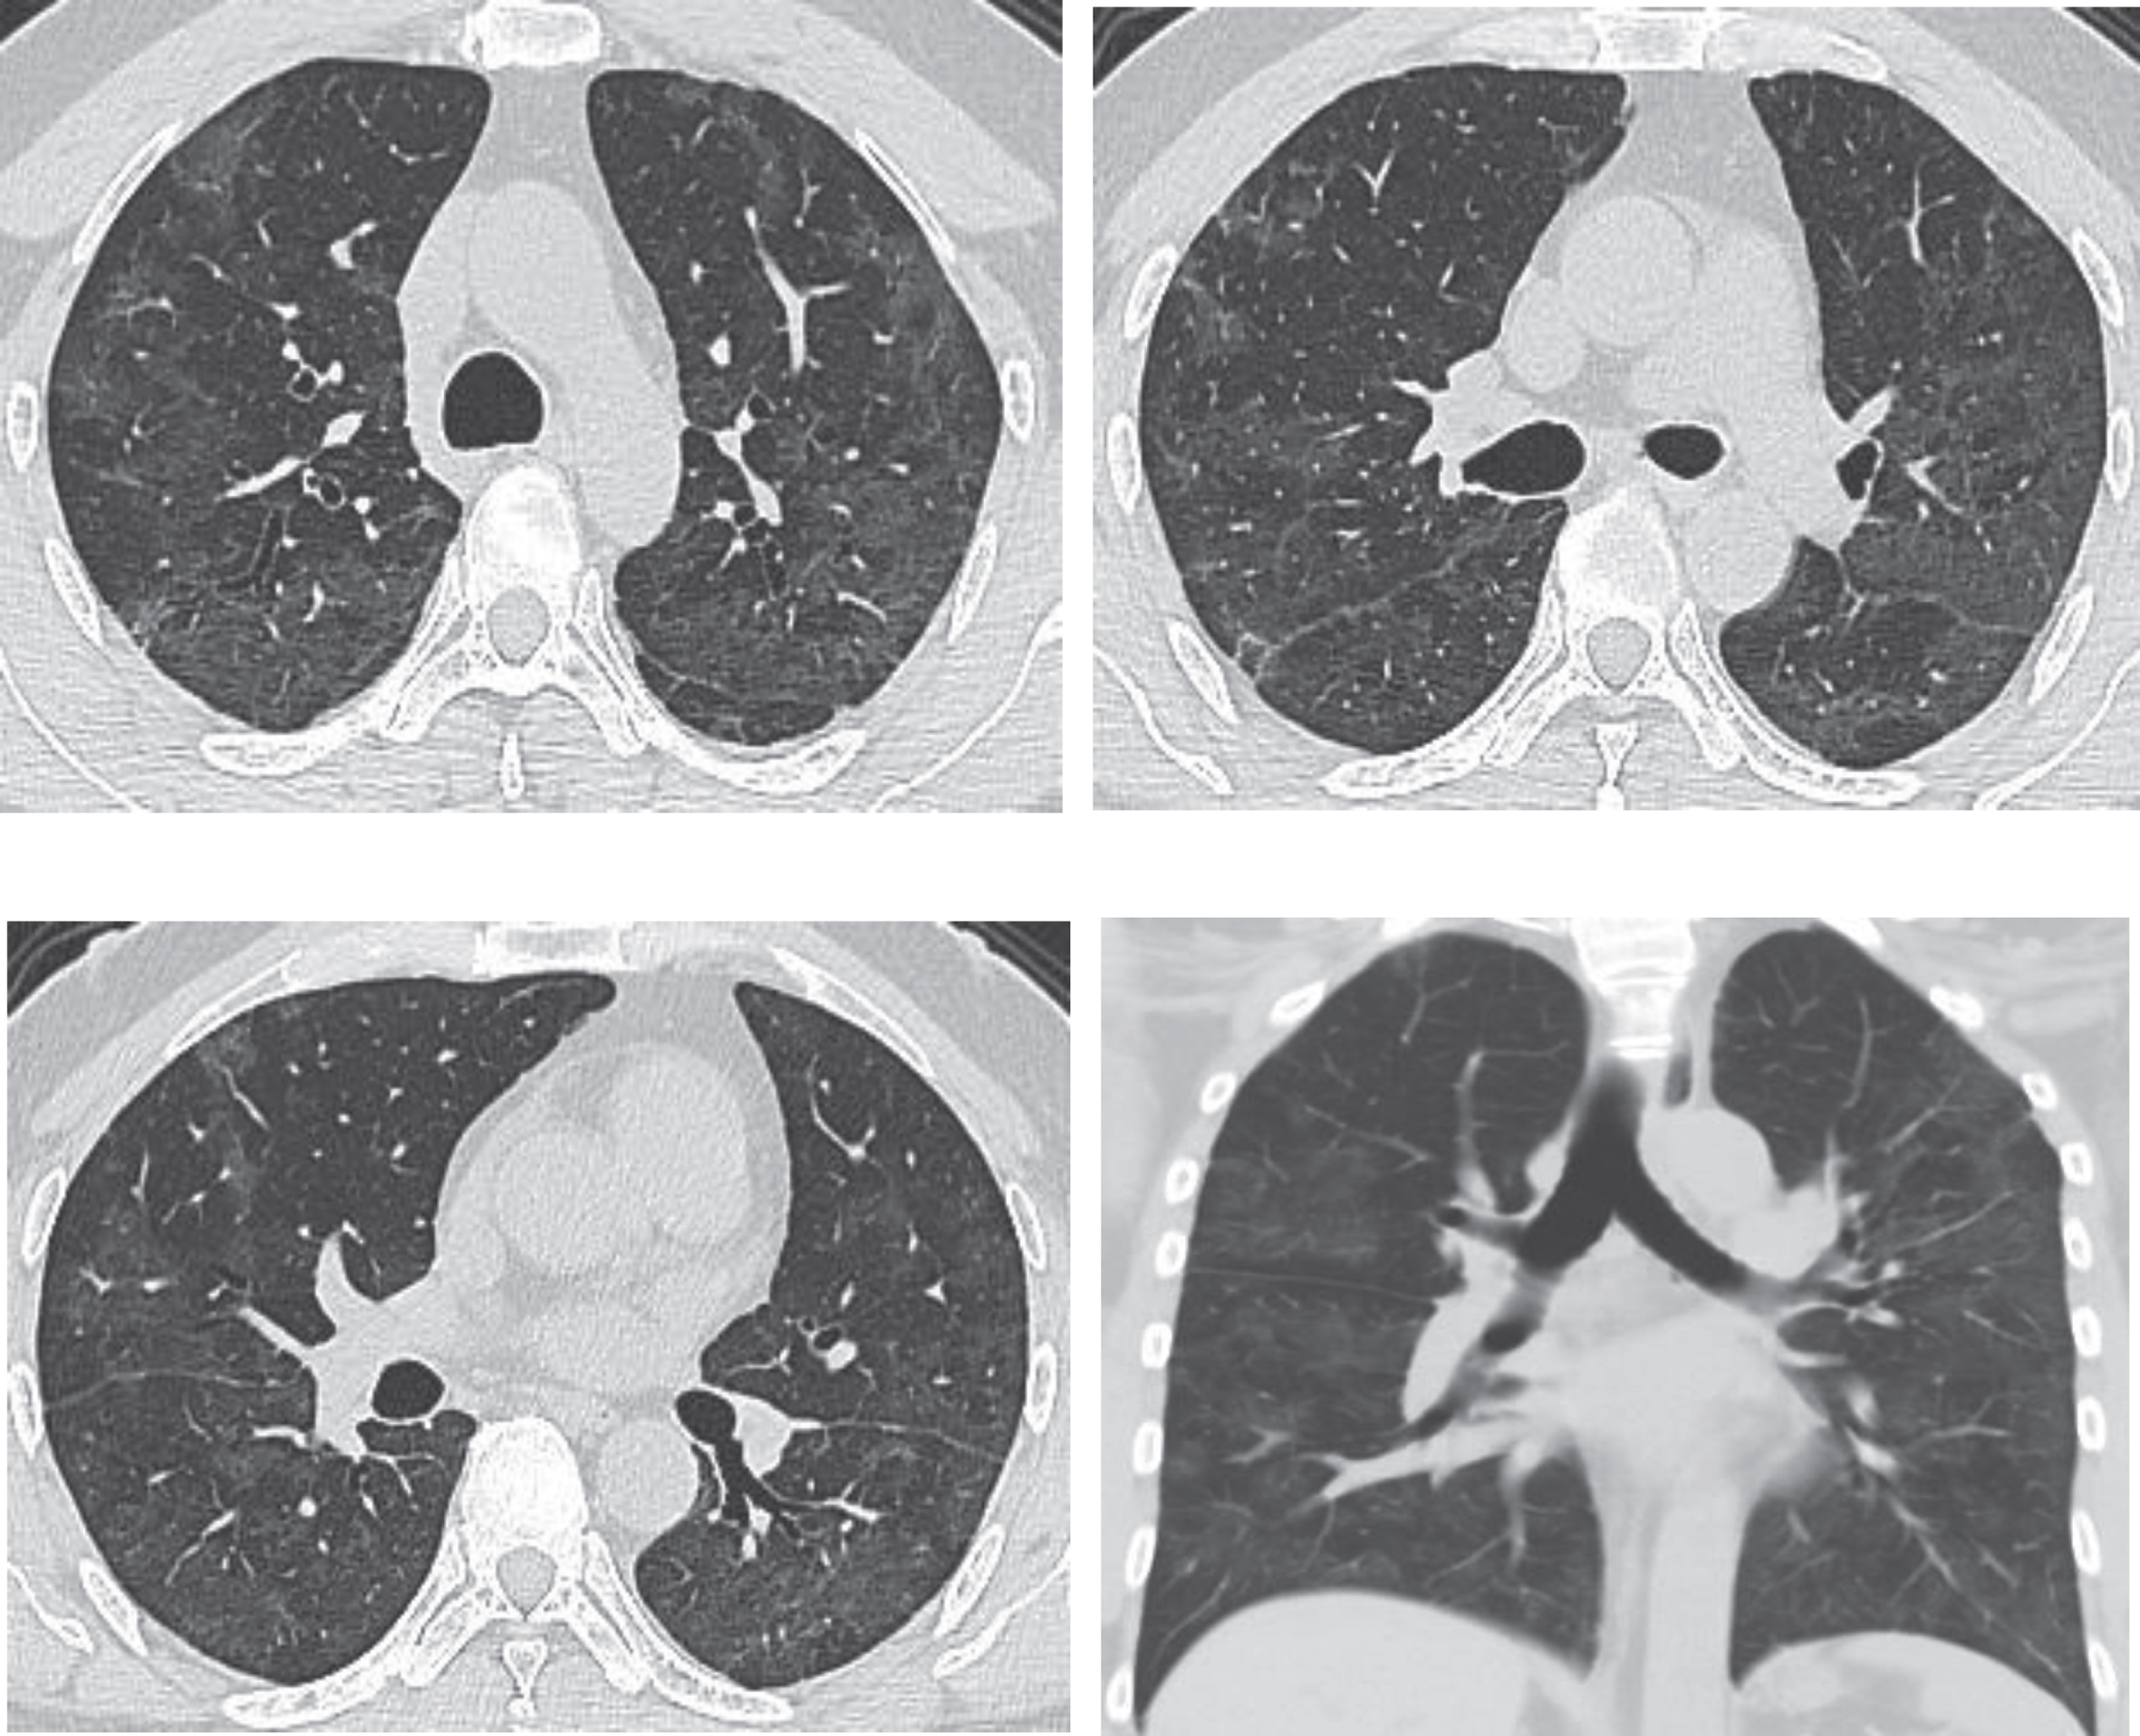 Chest CT scans on March 20th, 2020, for the same patient shown by Figs. 1–3, after treatment, showing obvious absorption of lesions (decreased lesions with partial fibrosis). After admission, the patient received antiviral and atomizing therapies, but symptoms aggravated with repeated fever, cough, expectoration, and gasp. A written notice of danger was given on February 2nd 2020, and the patient was given oxygen inhalation, continuous ECG monitoring, finger pulse oxygen monitoring, anti-infection treatment, anti-virus therapy, atomization of recombinant human interferon α2b and intravenous injection of human immunoglobulin to improve immunity, as well as symptomatic treatments to reduce inflammation. The symptoms improved after treatment. Chest CT scans on March 20th showed the obvious absorption of the lesions. Re-test of nucleic acid of novel coronavirus after an interval of 24 hours was negative. The patient was discharged in agreement after consulting with the Municipal Novel Coronavirus Pneumonia Expert Group of the 4th People’s Hospital of Nanning City.